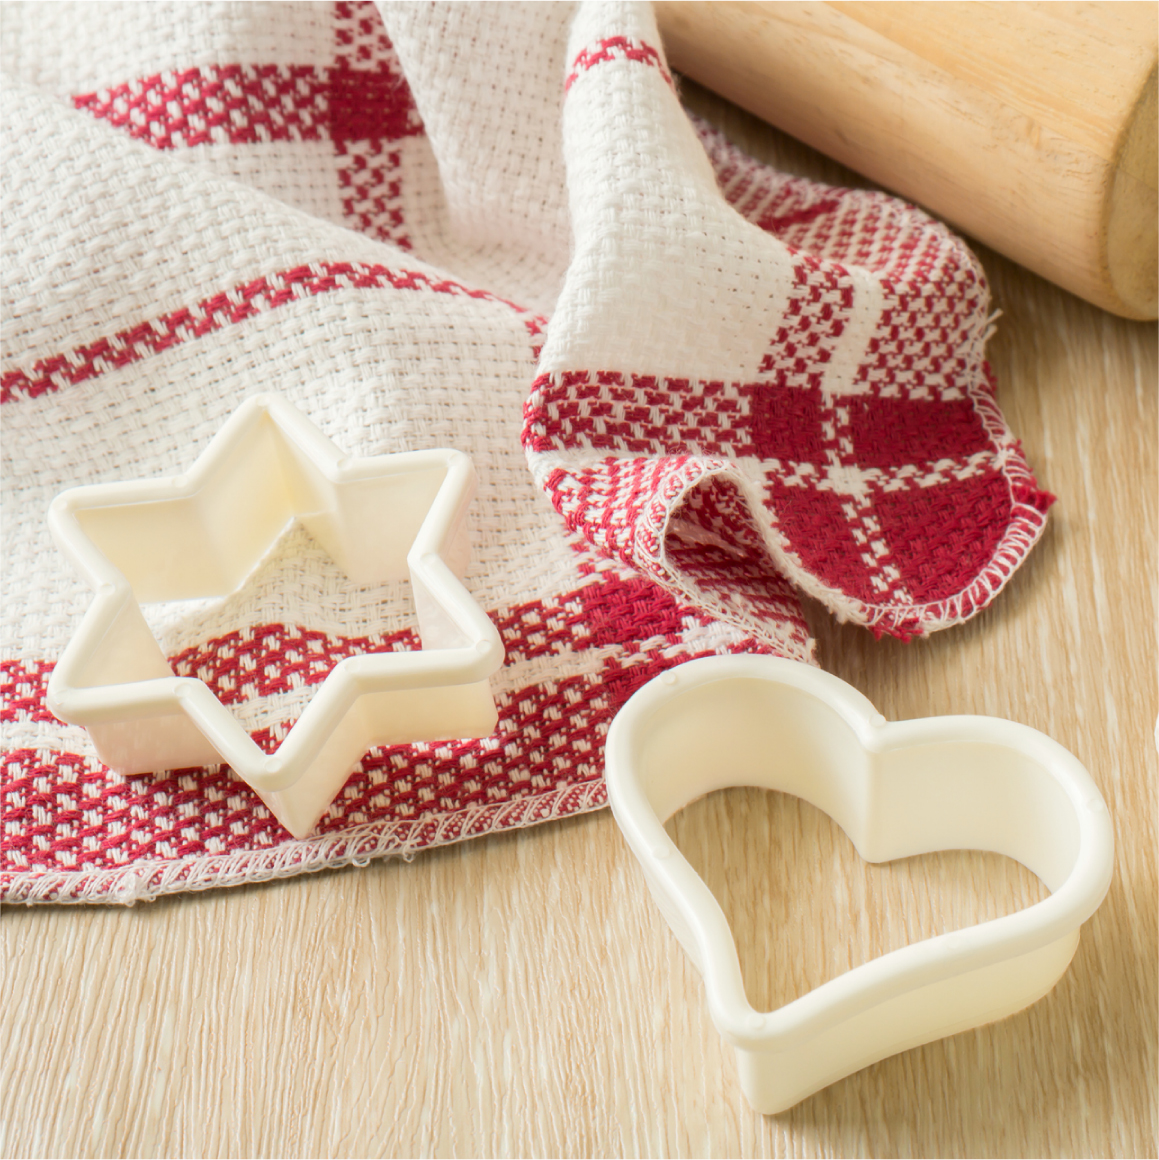 Cookie cutters on table with table cloth